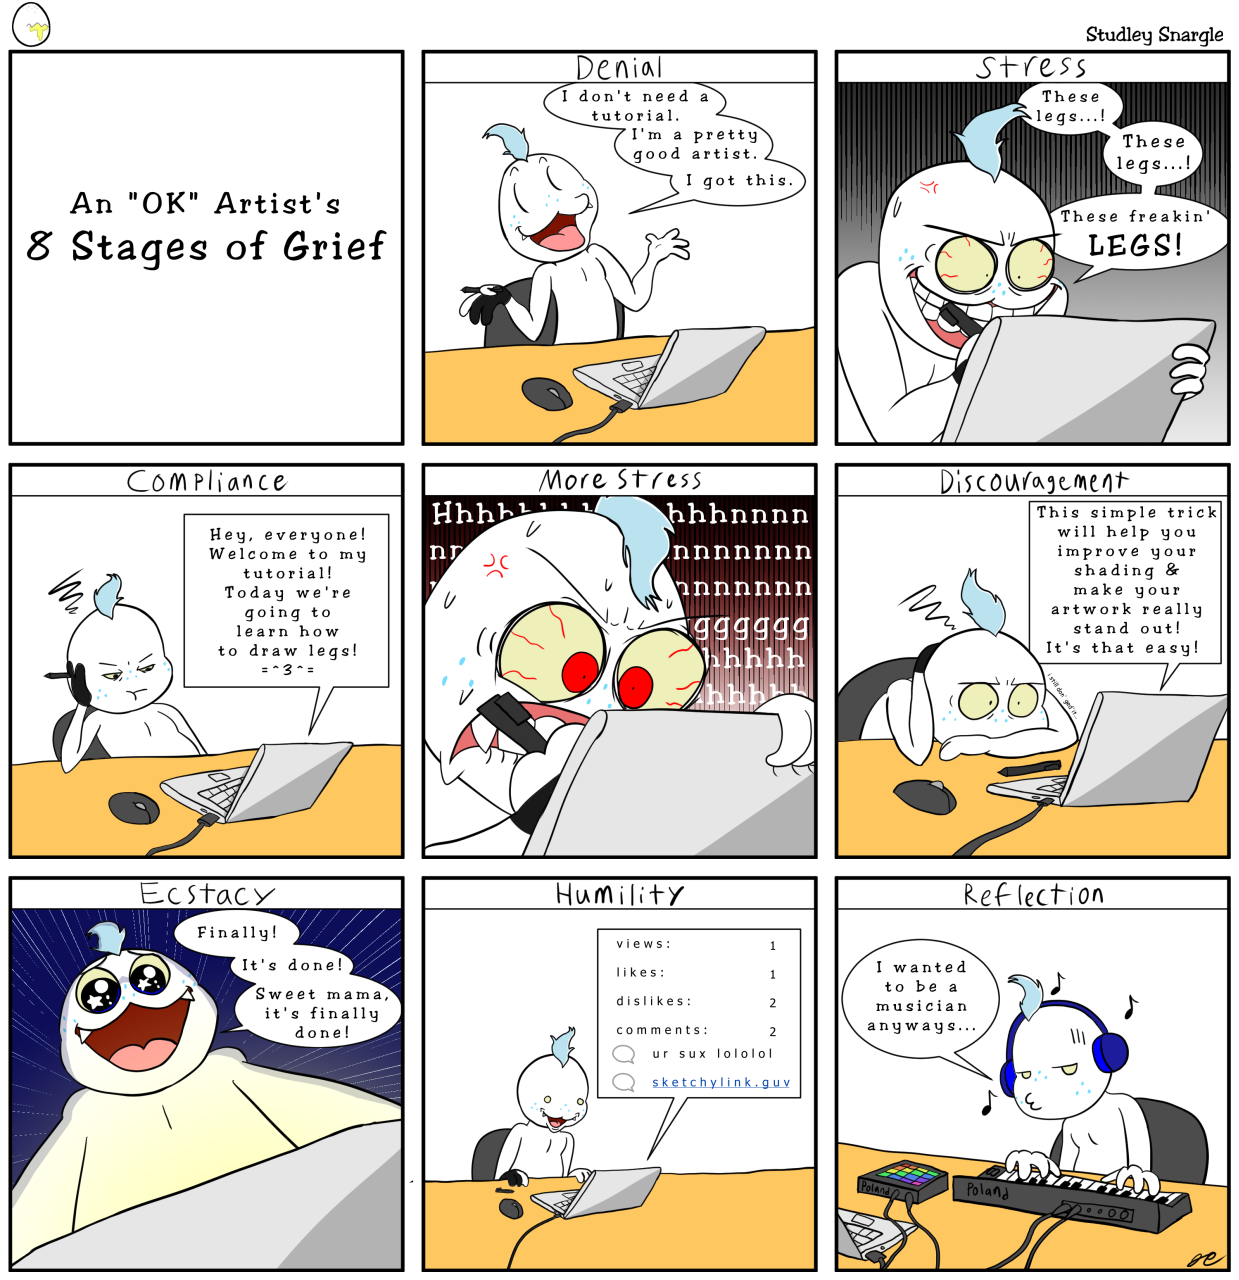 8 Stages Of Grief By Studley Snargle Fur Affinity Dot Net